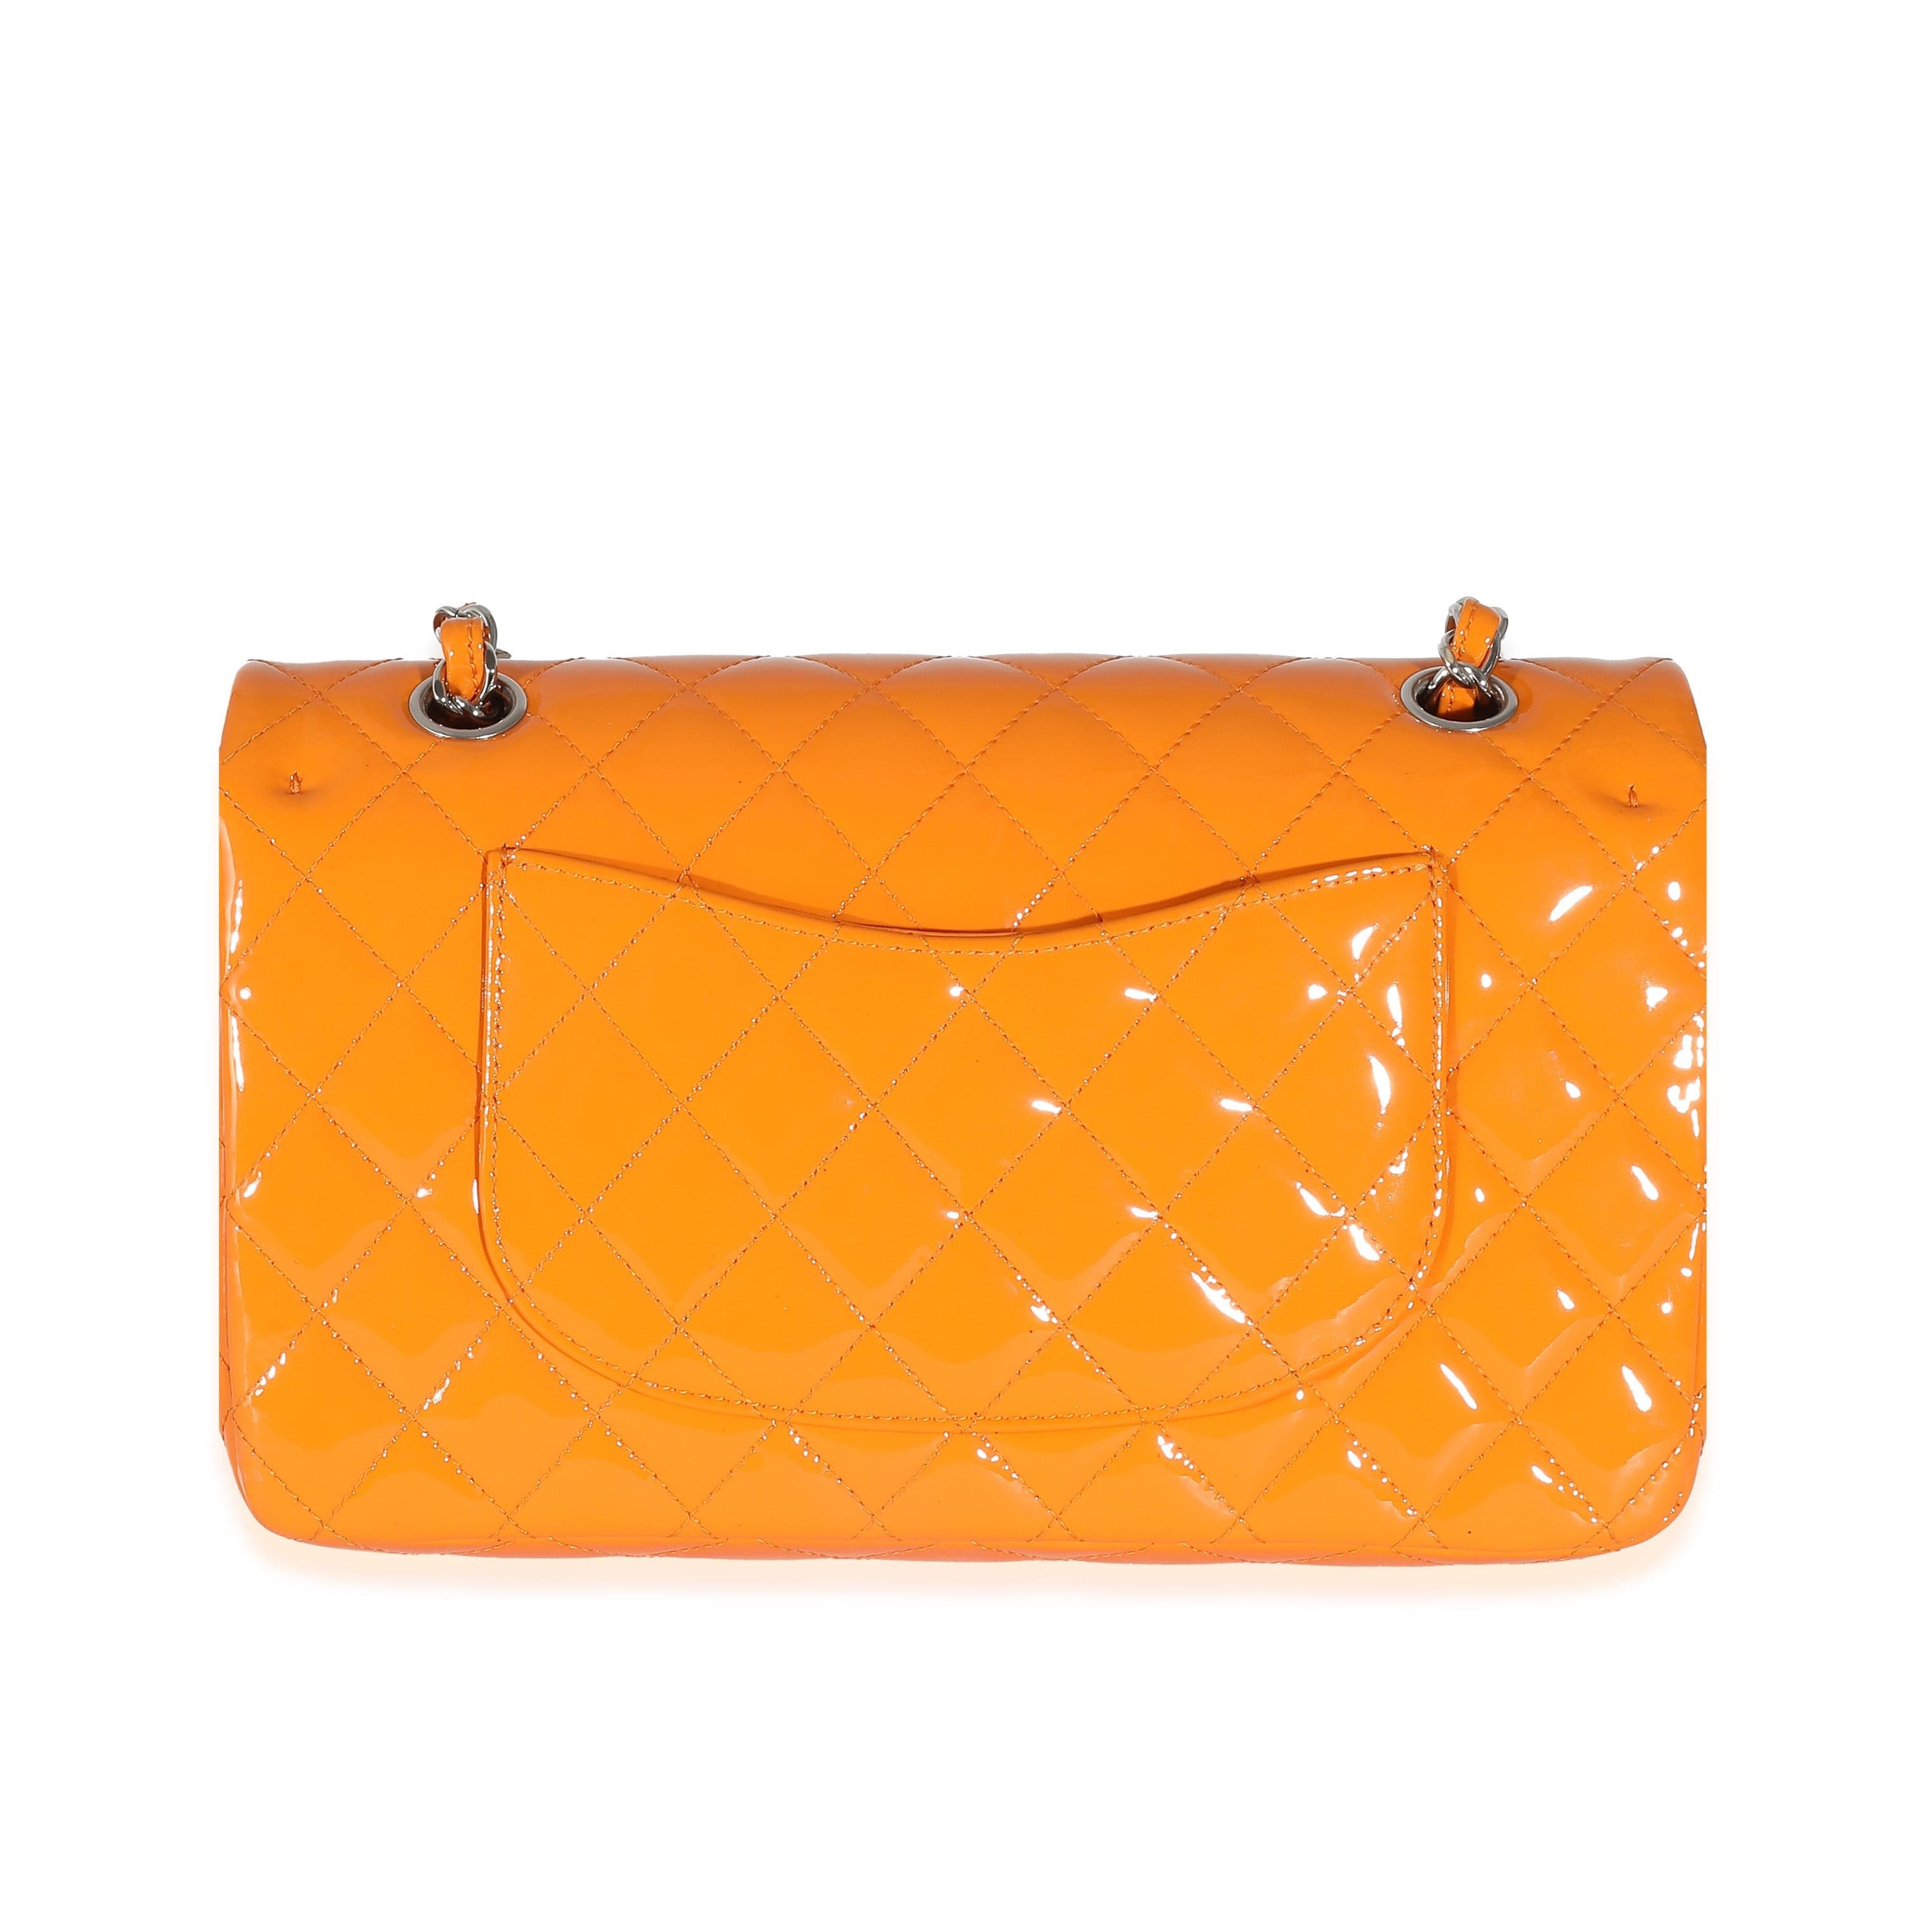 Chanel Chanel Orange Quilted Patent Medium Classic Double Flap Bag